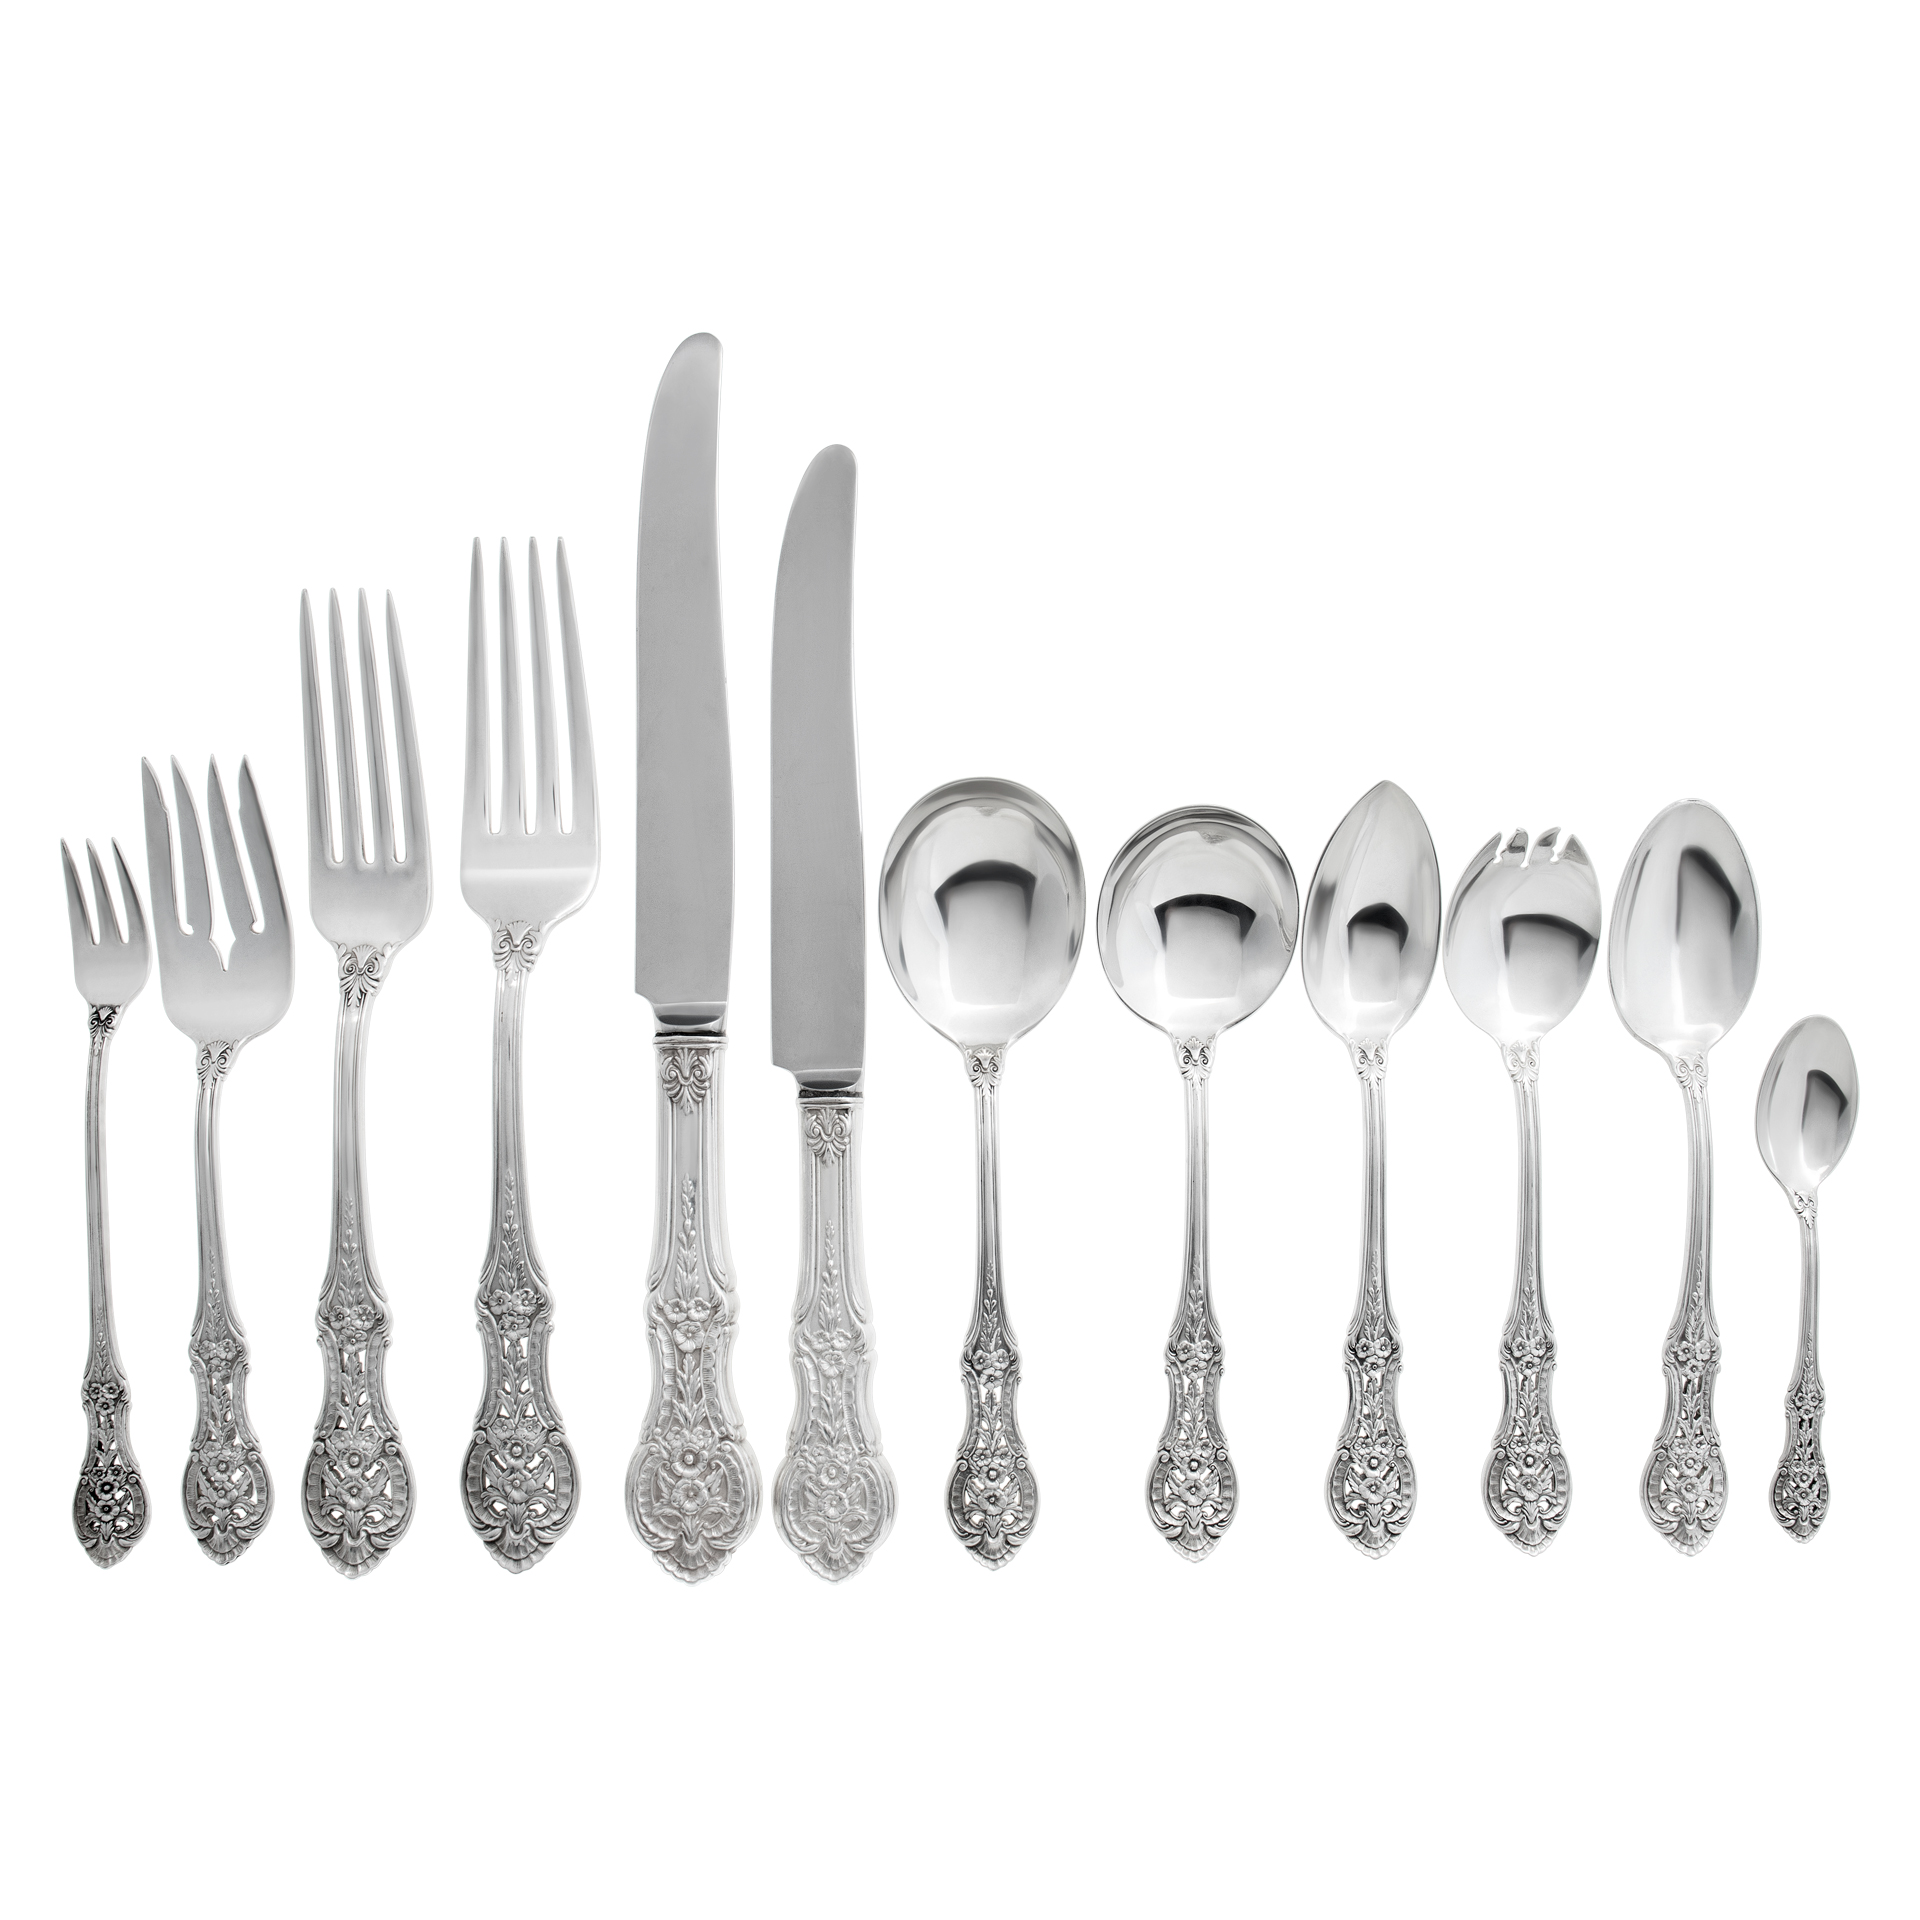 PRIMROSE, Sterling silver flatware set by International, patented in 1936. Lunch & dinner with 12 serving pieces. 165 total pieces .approx. 153 troy ounces of .925 sterling silver.